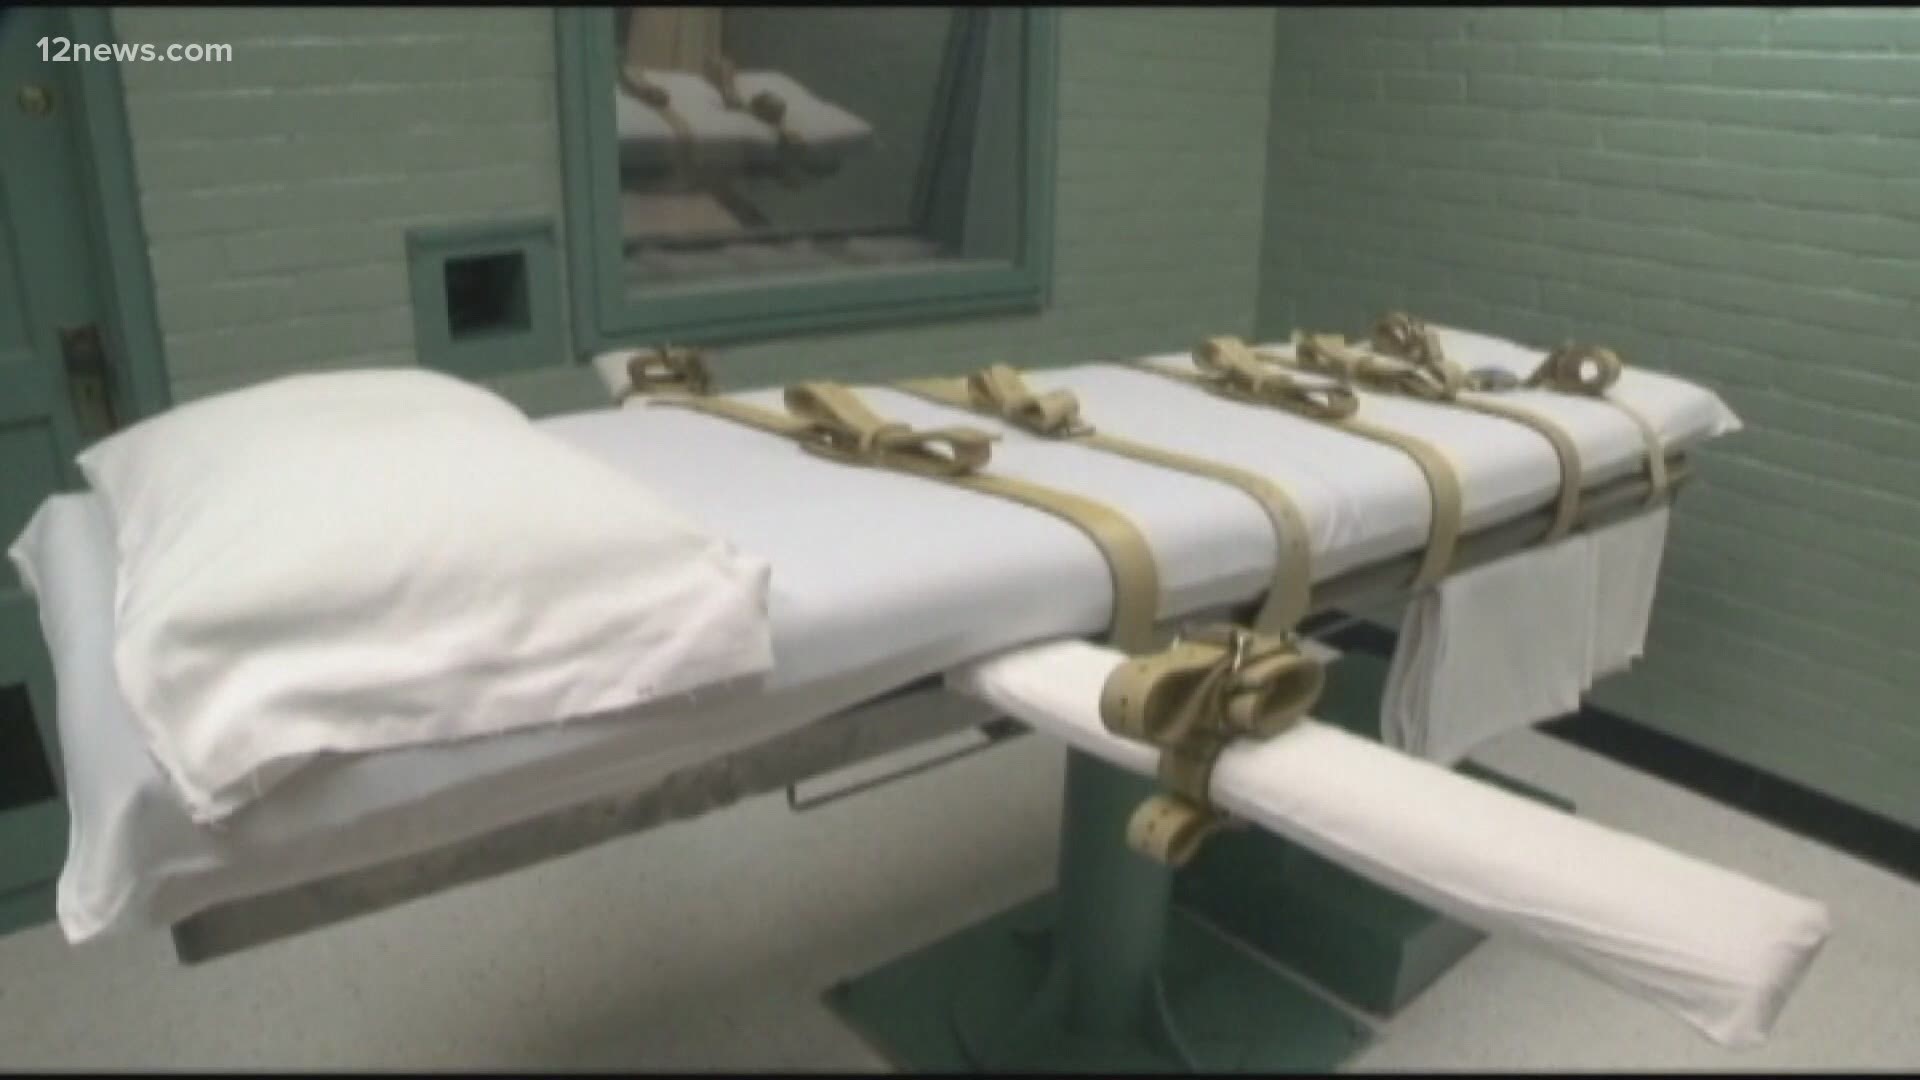 Arizona's prison director confirmed that he's ready to restart the death chamber. For several months, Arizona's attorney general has pushed to resume executions.